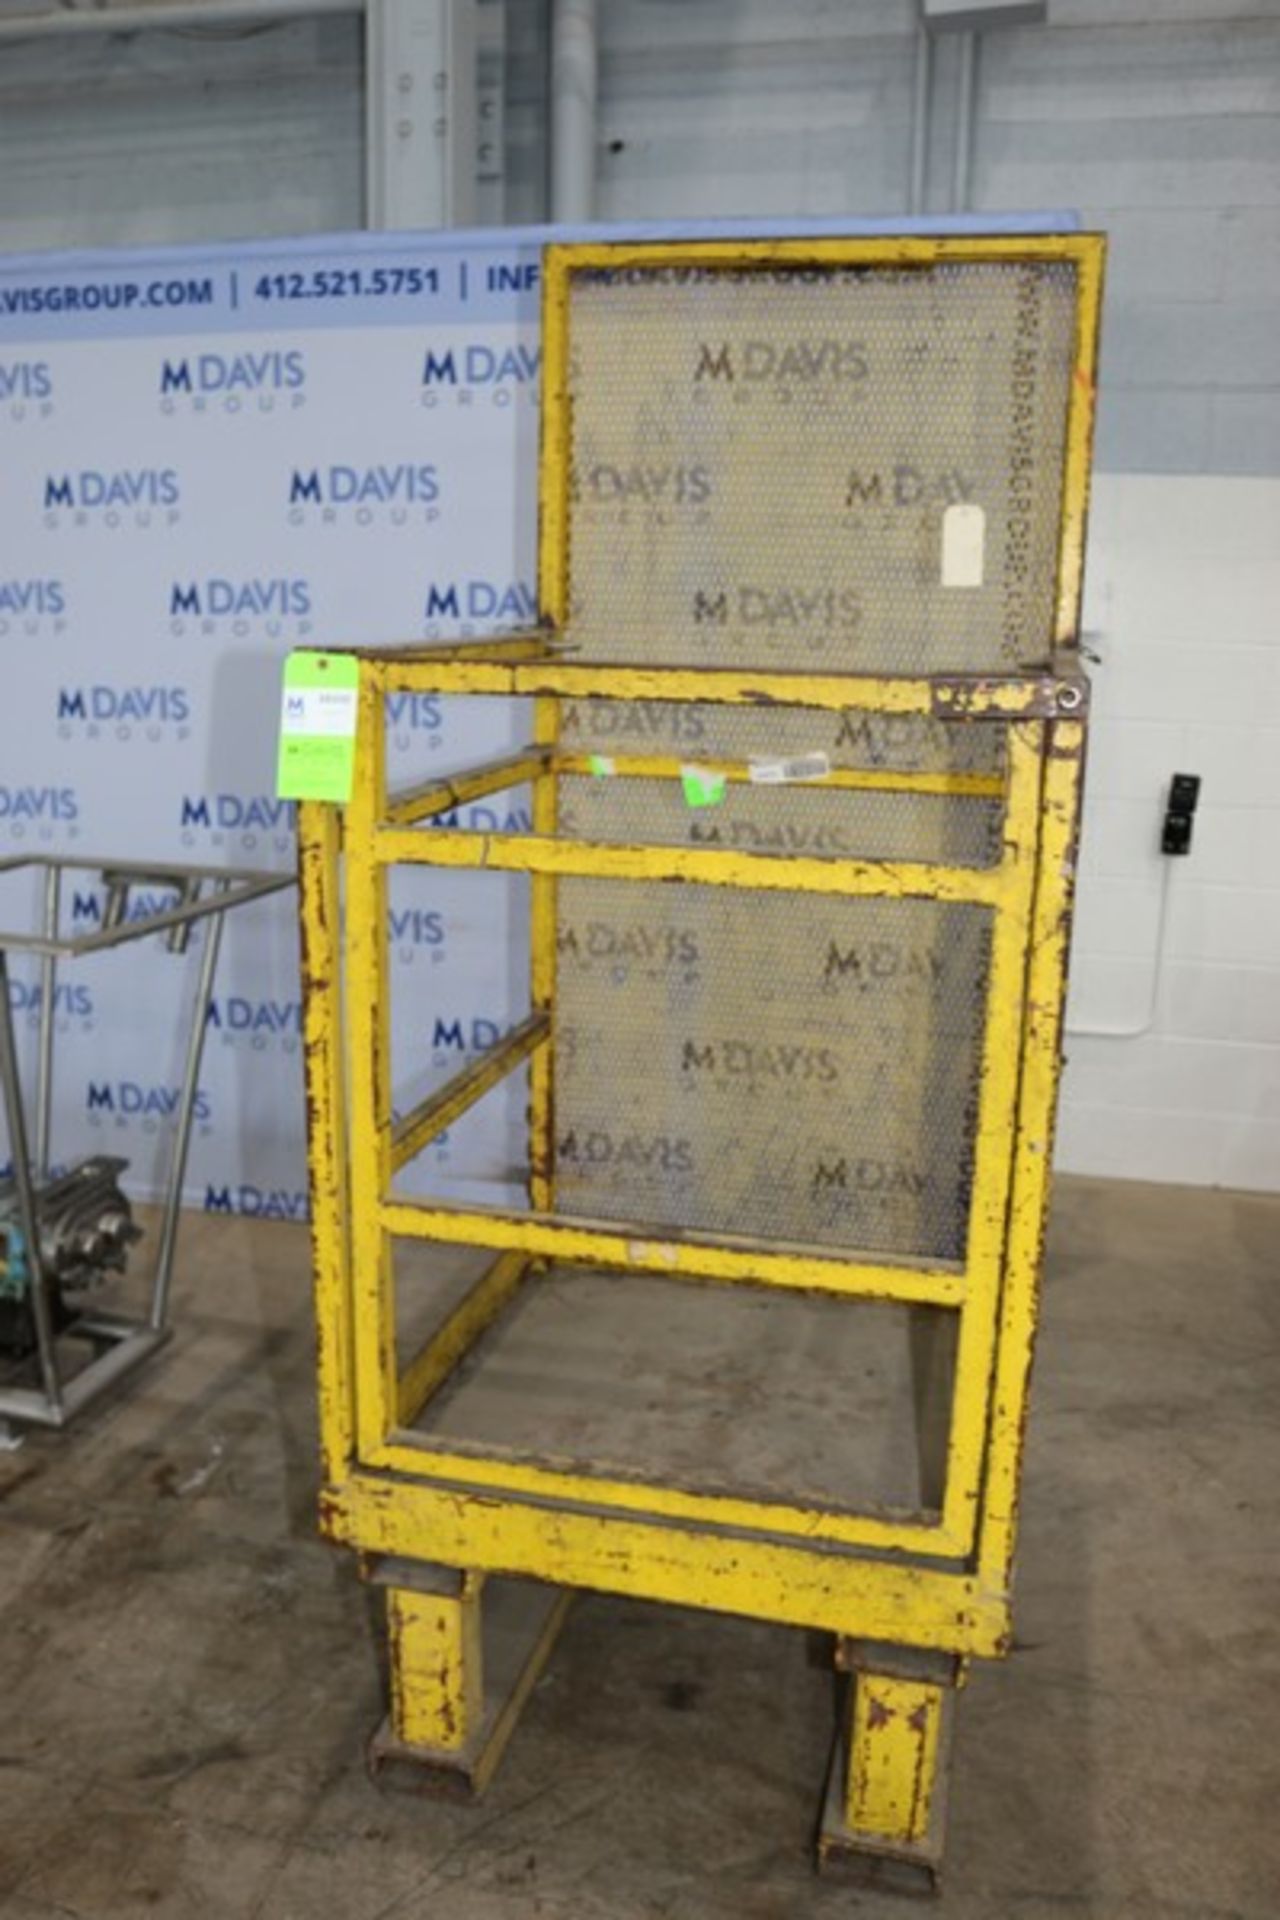 Man Cage Forklift Attachment, Overall Dimensions: Aprox. 37" L x 33-1/2" W x 82" H, with Swing - Image 4 of 4